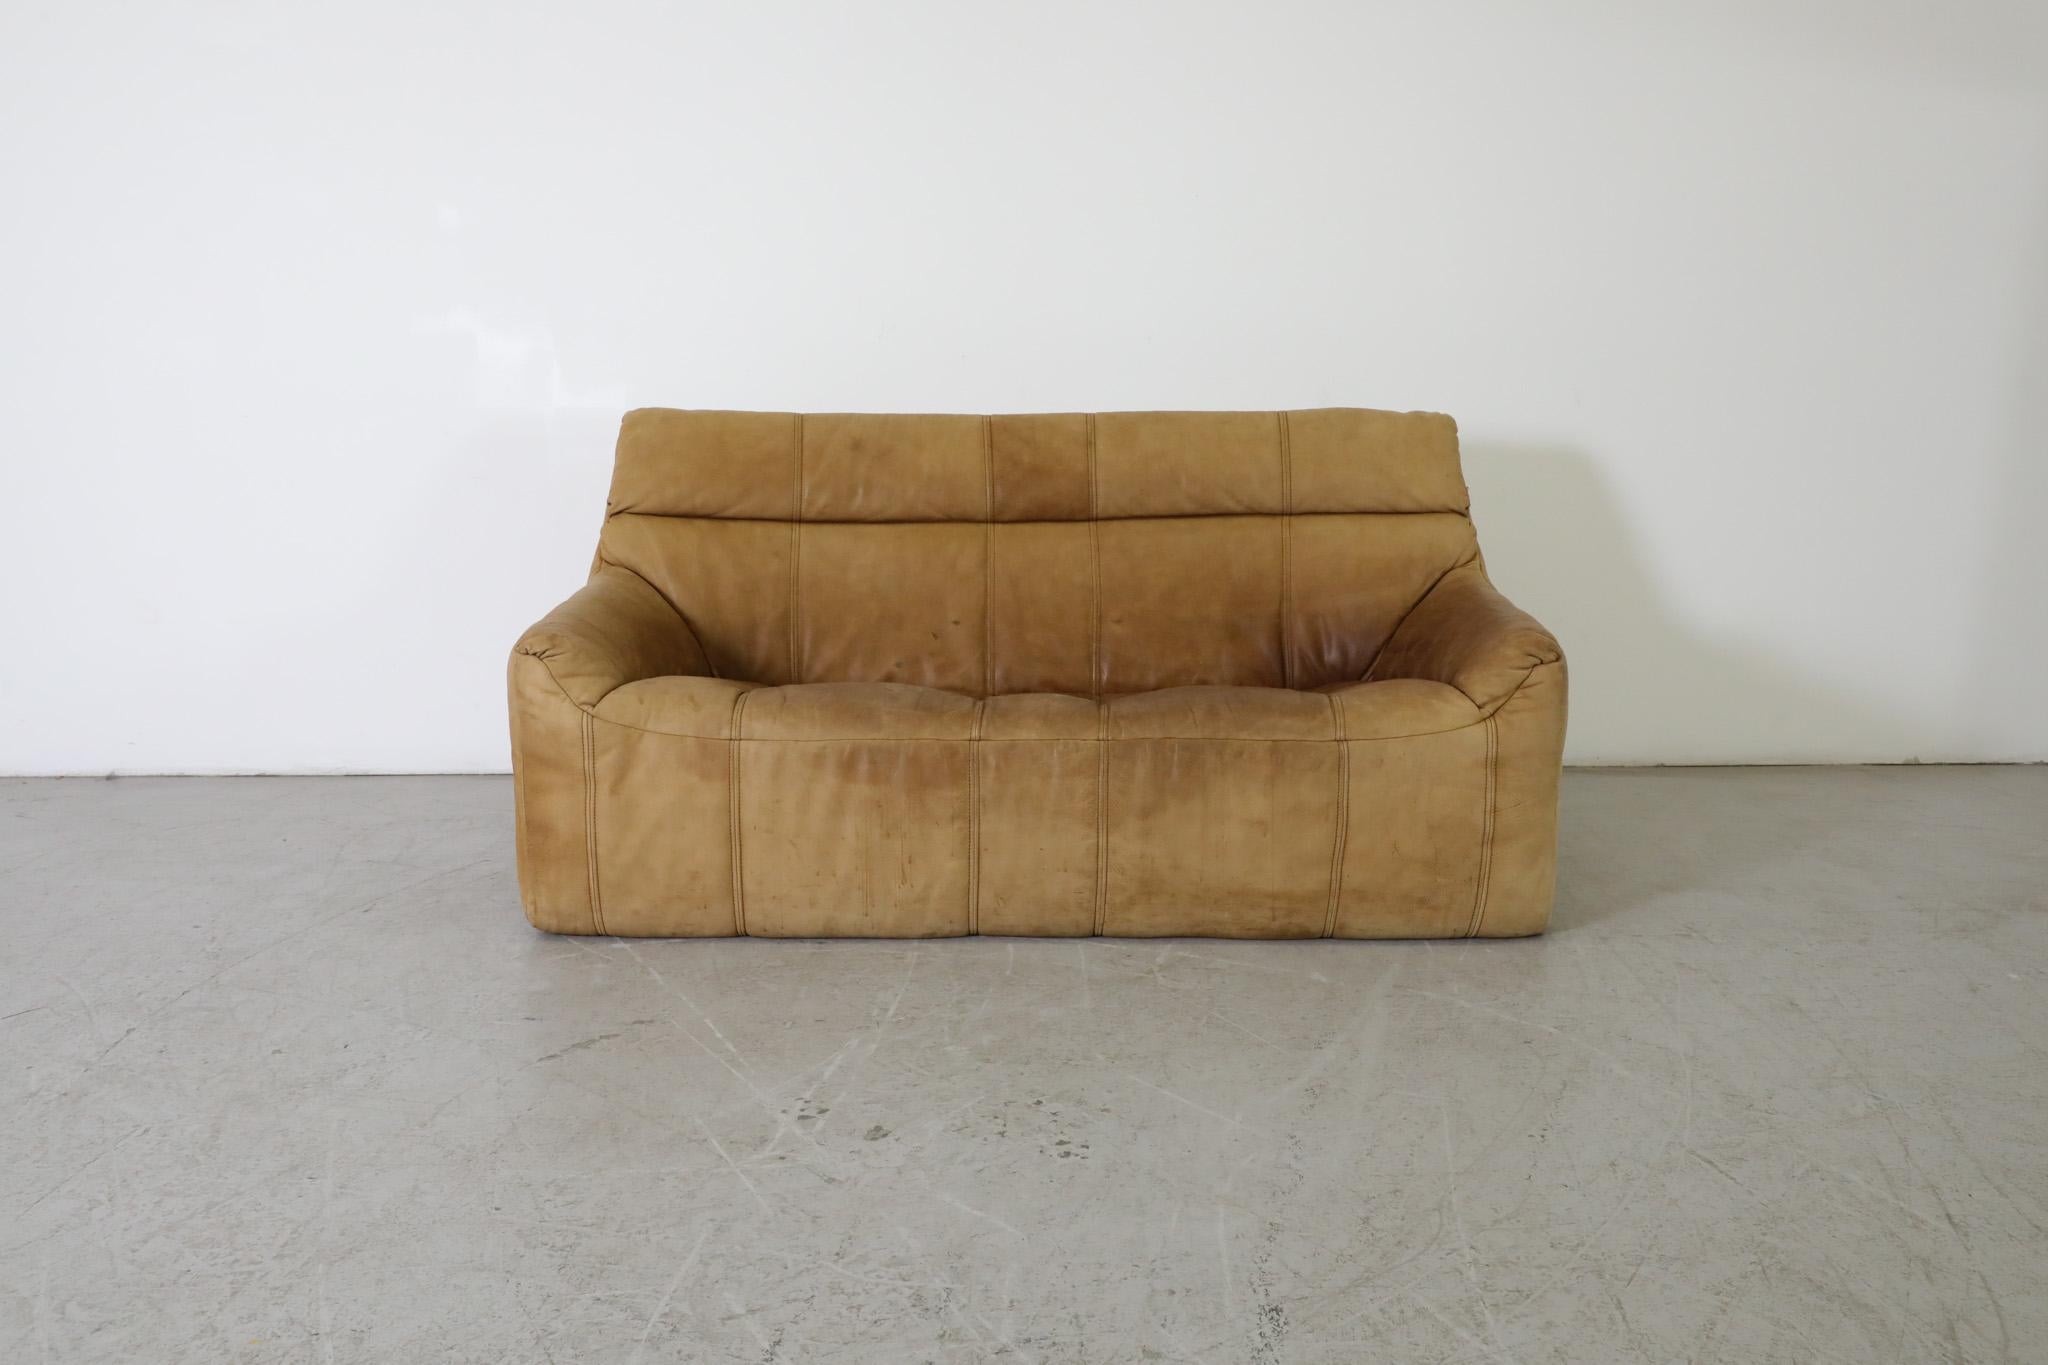 German Rolf Benz Soft Form Buck Leather Loveseats, 1970s For Sale